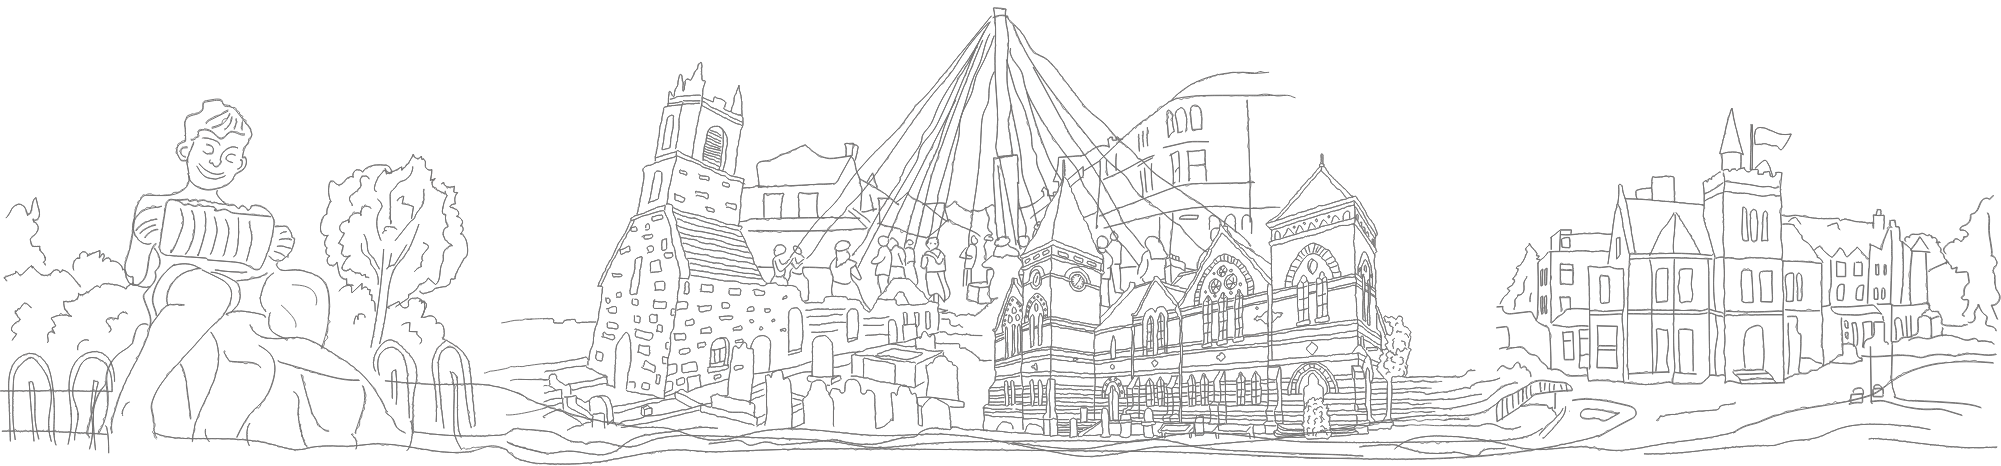 A handdrawn-style illustration depicting landmarks from Holywood in Northern Ireland